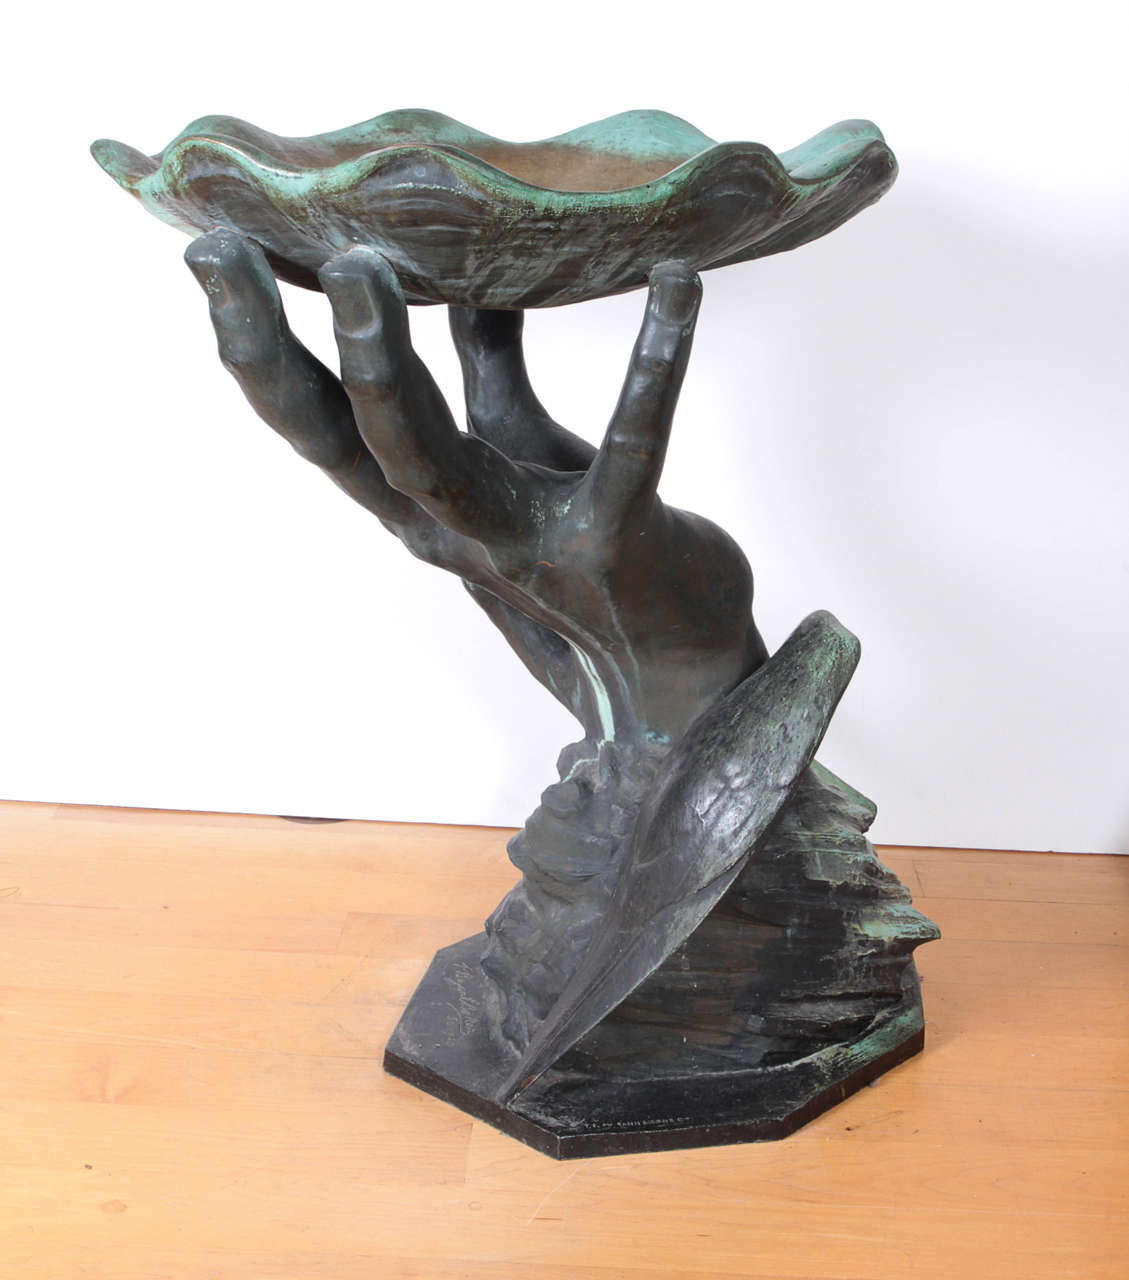 Recreation of a bronze birdbath in the form of a hand holding a scalloped shell by the artist P. Bryant Baker. Baker was known for monumental sculpture. His most famous piece is Pioneer Women--a woman 27' tall with a child--in Ponca City, Oklahoma.